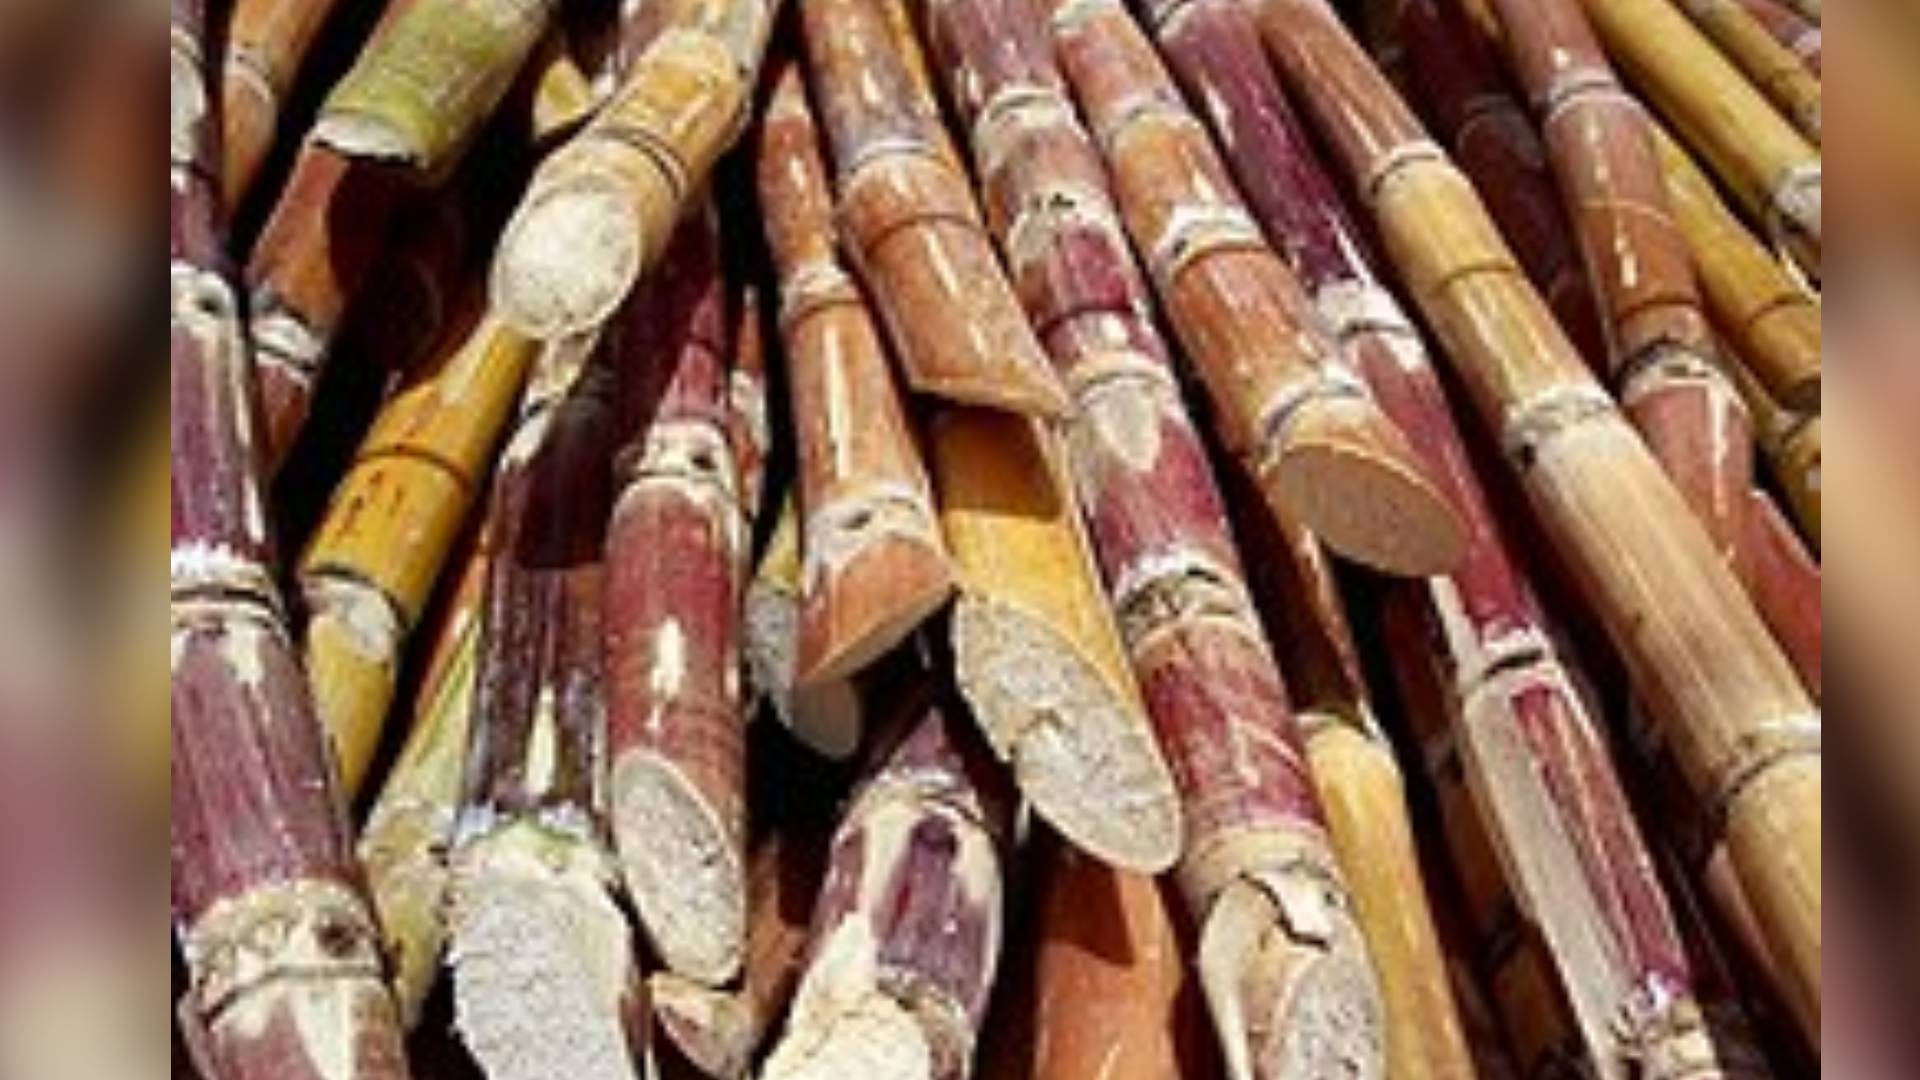 Cabinet approves hike in sugarcane FRP by Rs 25 to Rs 340 per quintal for 2024-25 season